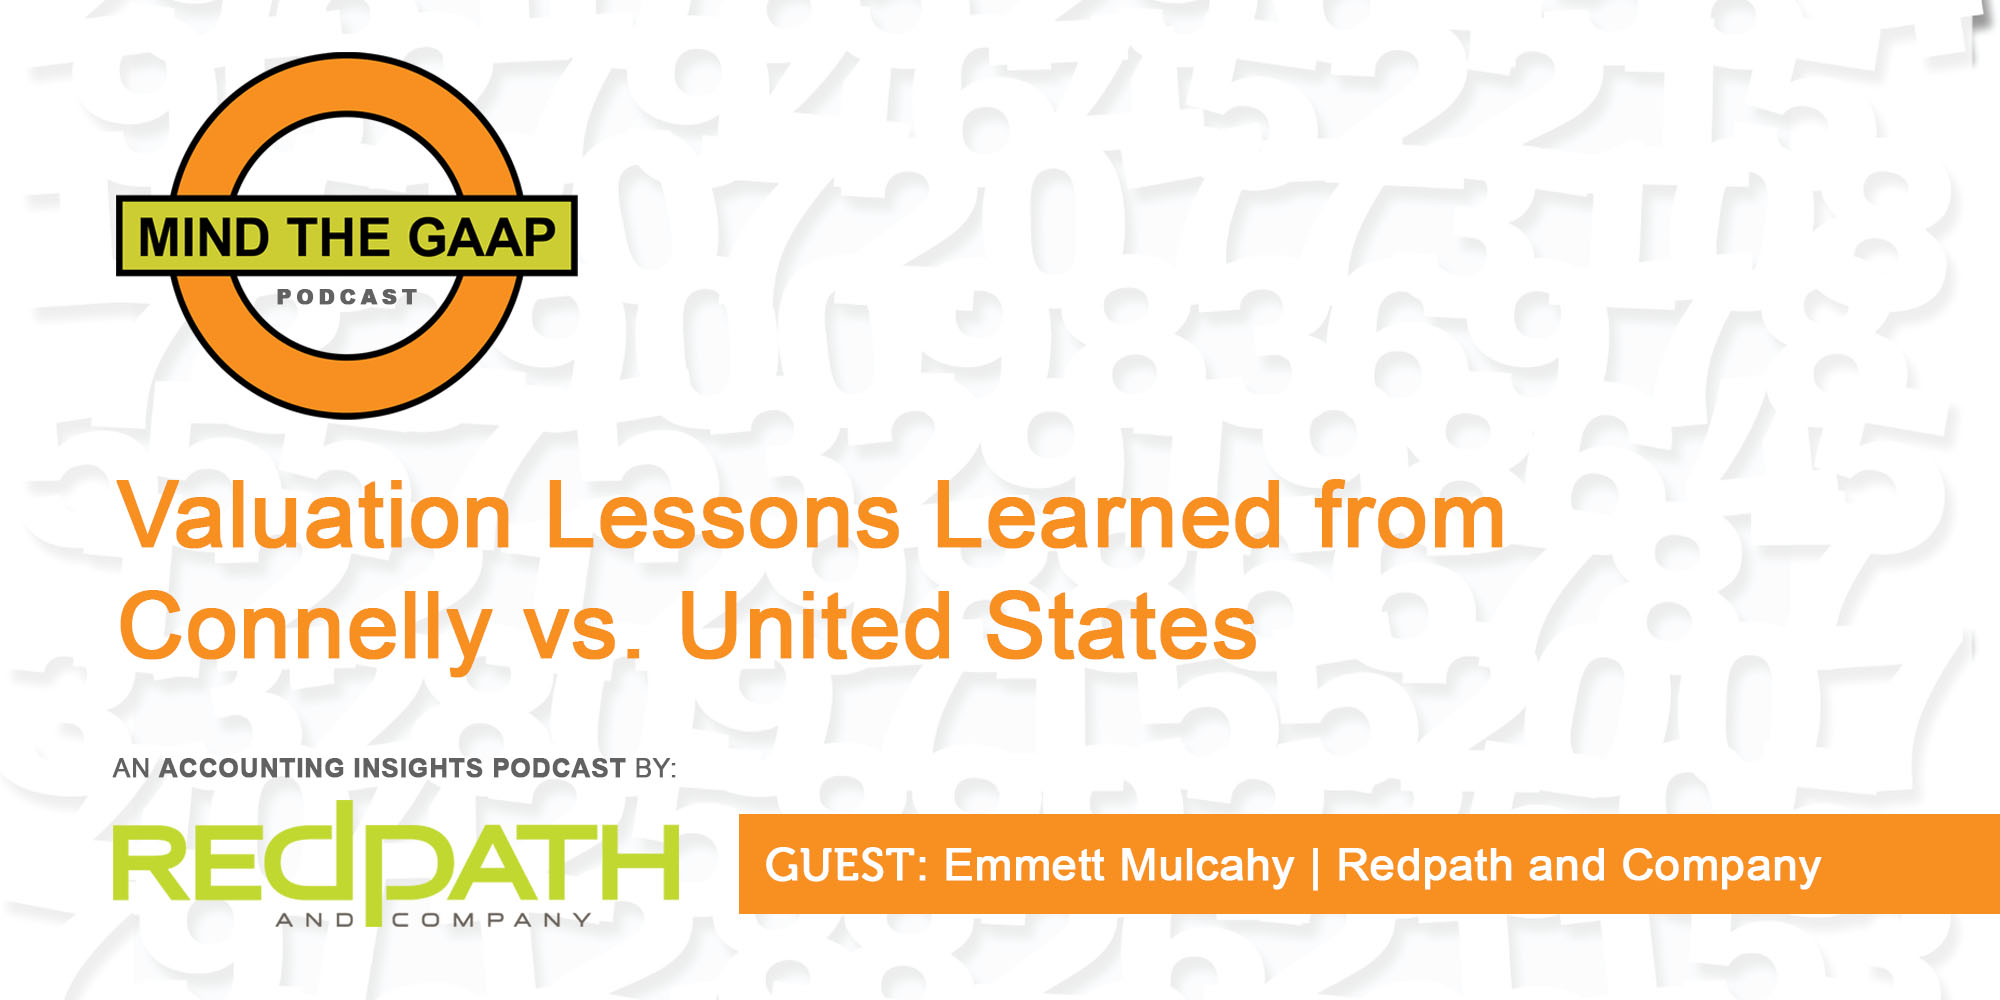 Valuation Lessons Learned from Connelly vs. United States [PODCAST]